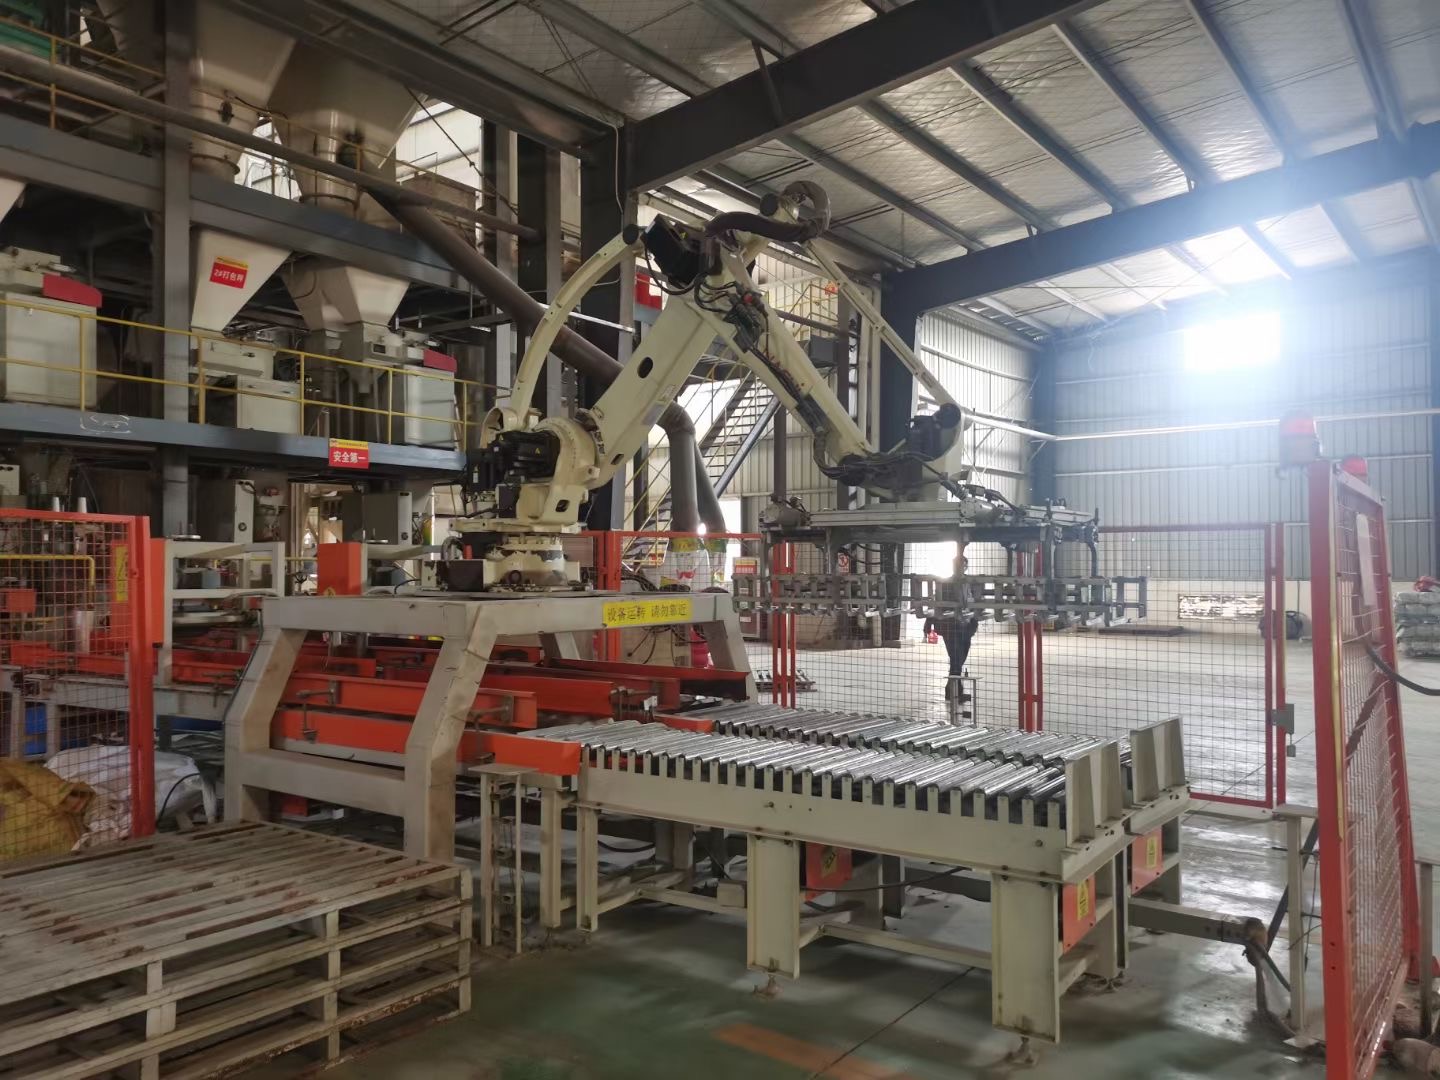 Tobacco Bulk Blends bagging machine Automated Bagging Line Fully Automatic Packing Palletizing Line, Fully Automatic Packing Line, Fully Automatic Bagging Line, Fully Automatic filling and packaging l